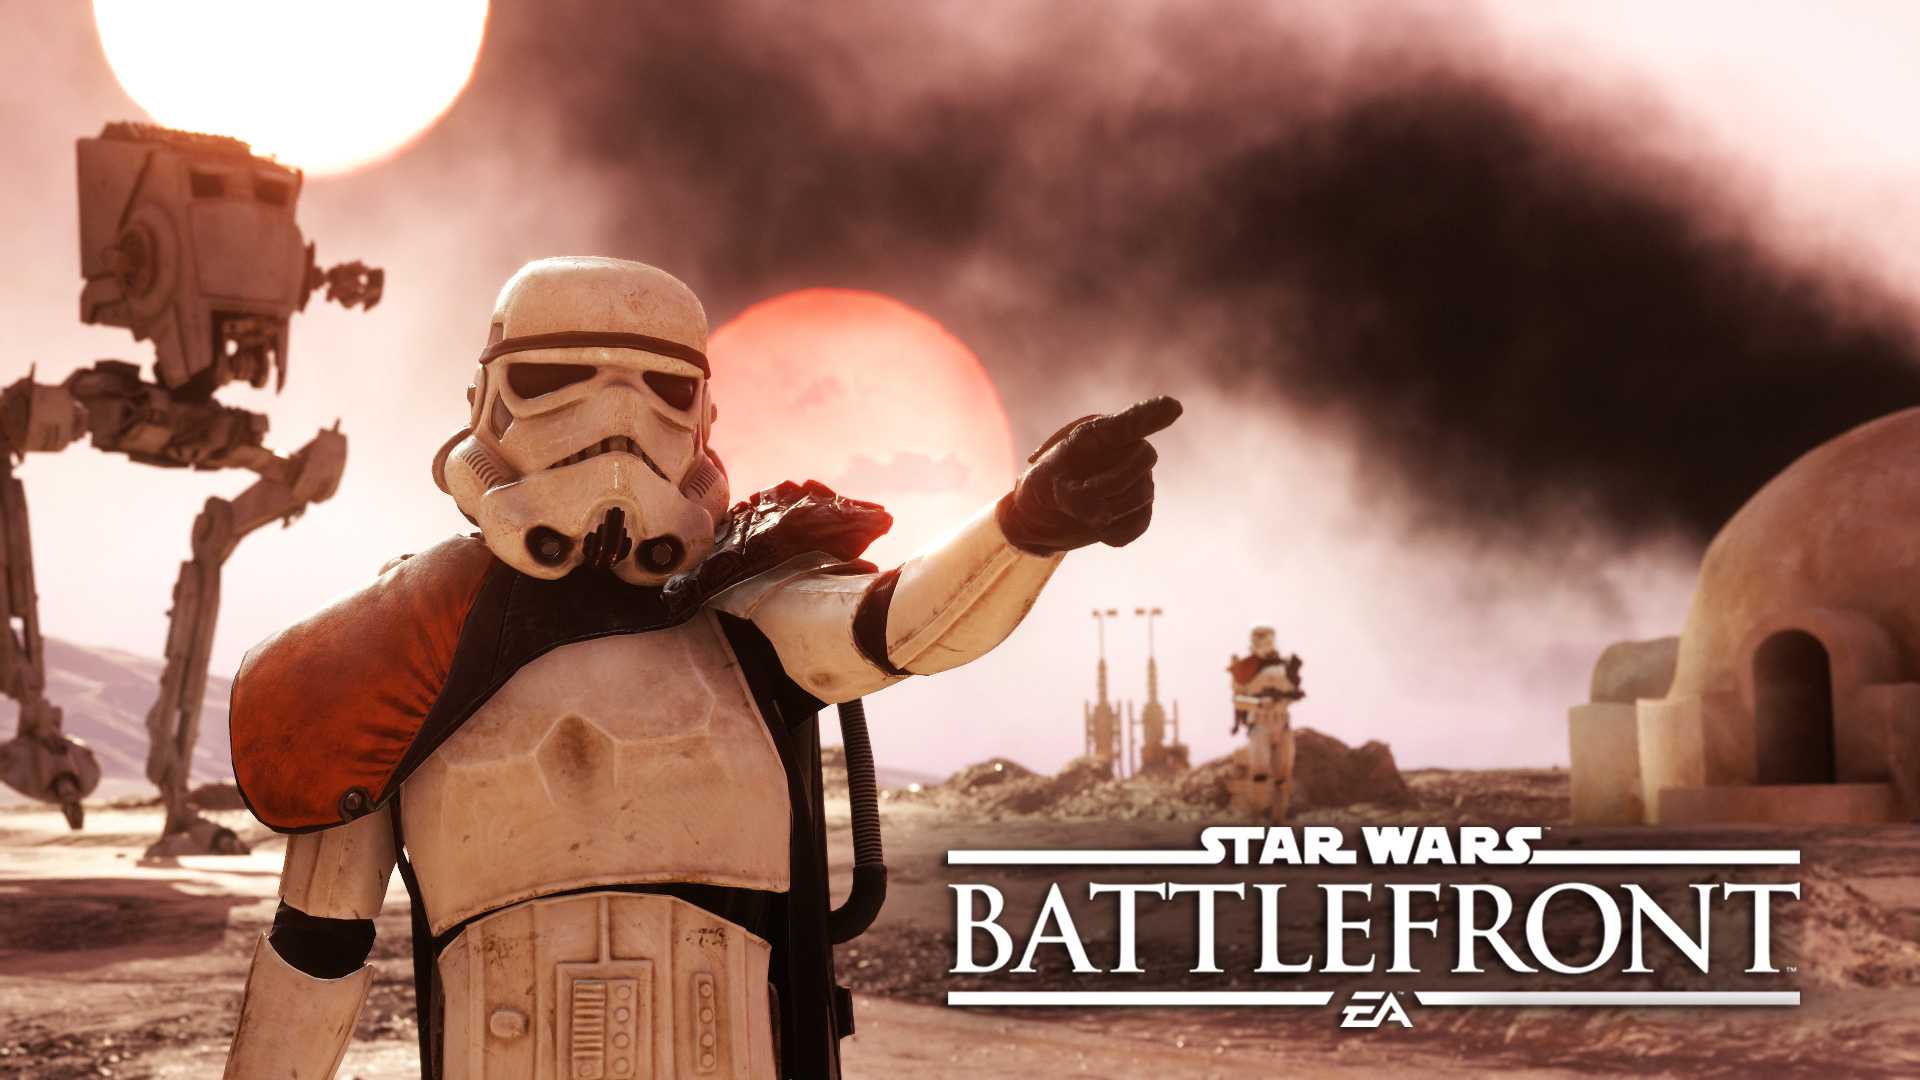 Media asset (photo, screenshot, or image in full size) related to contents posted at 3dfxzone.it | Image Name: Star-Wars-Battlefront-Season-Pass_10.jpg